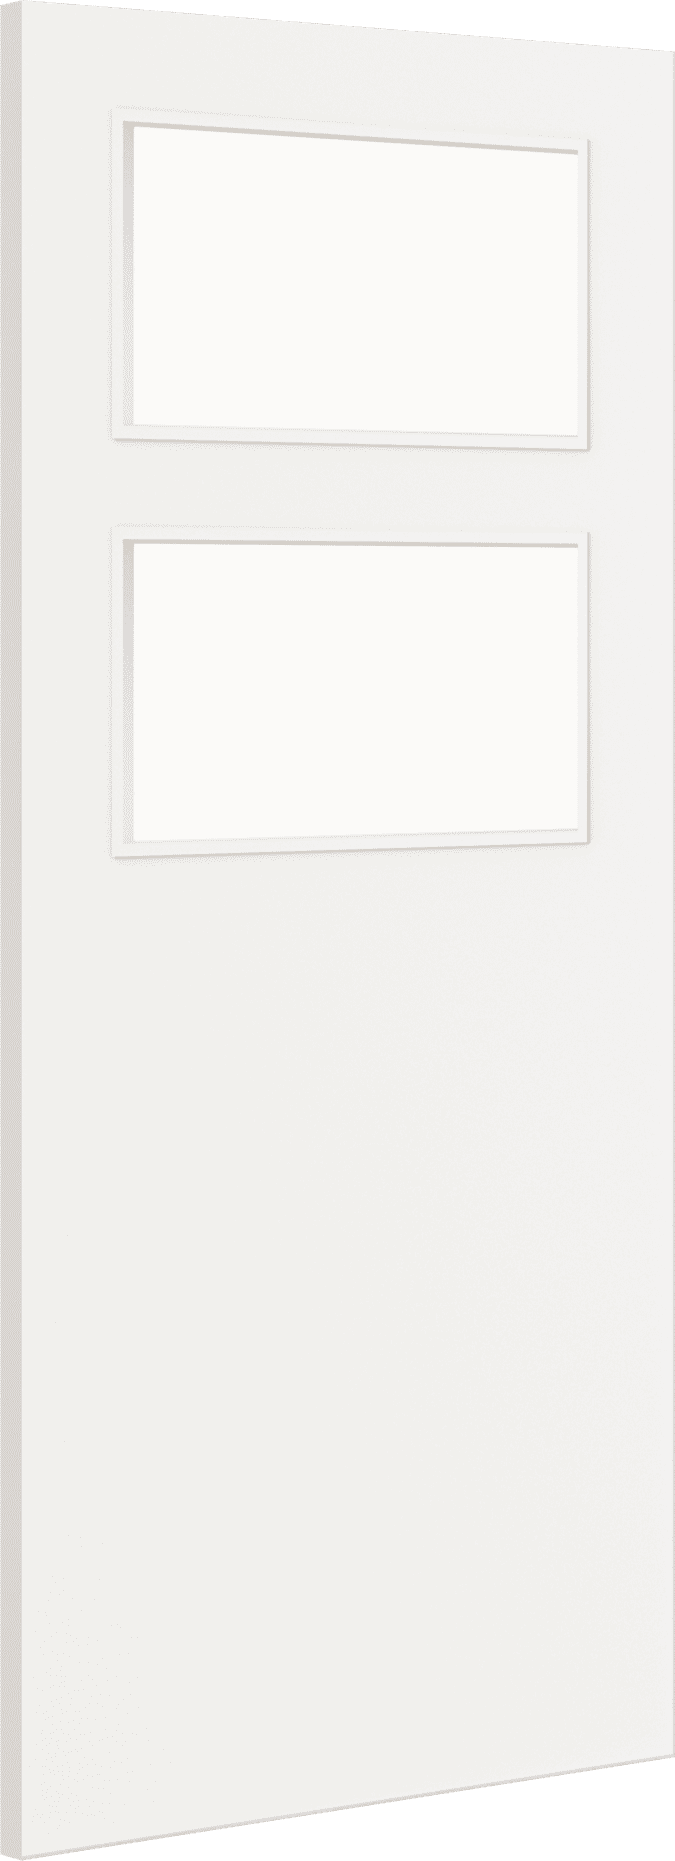 2040mm x 926mm x 44mm Architectural Paint Grade White 02 Frosted Glazed Fire Door Blank